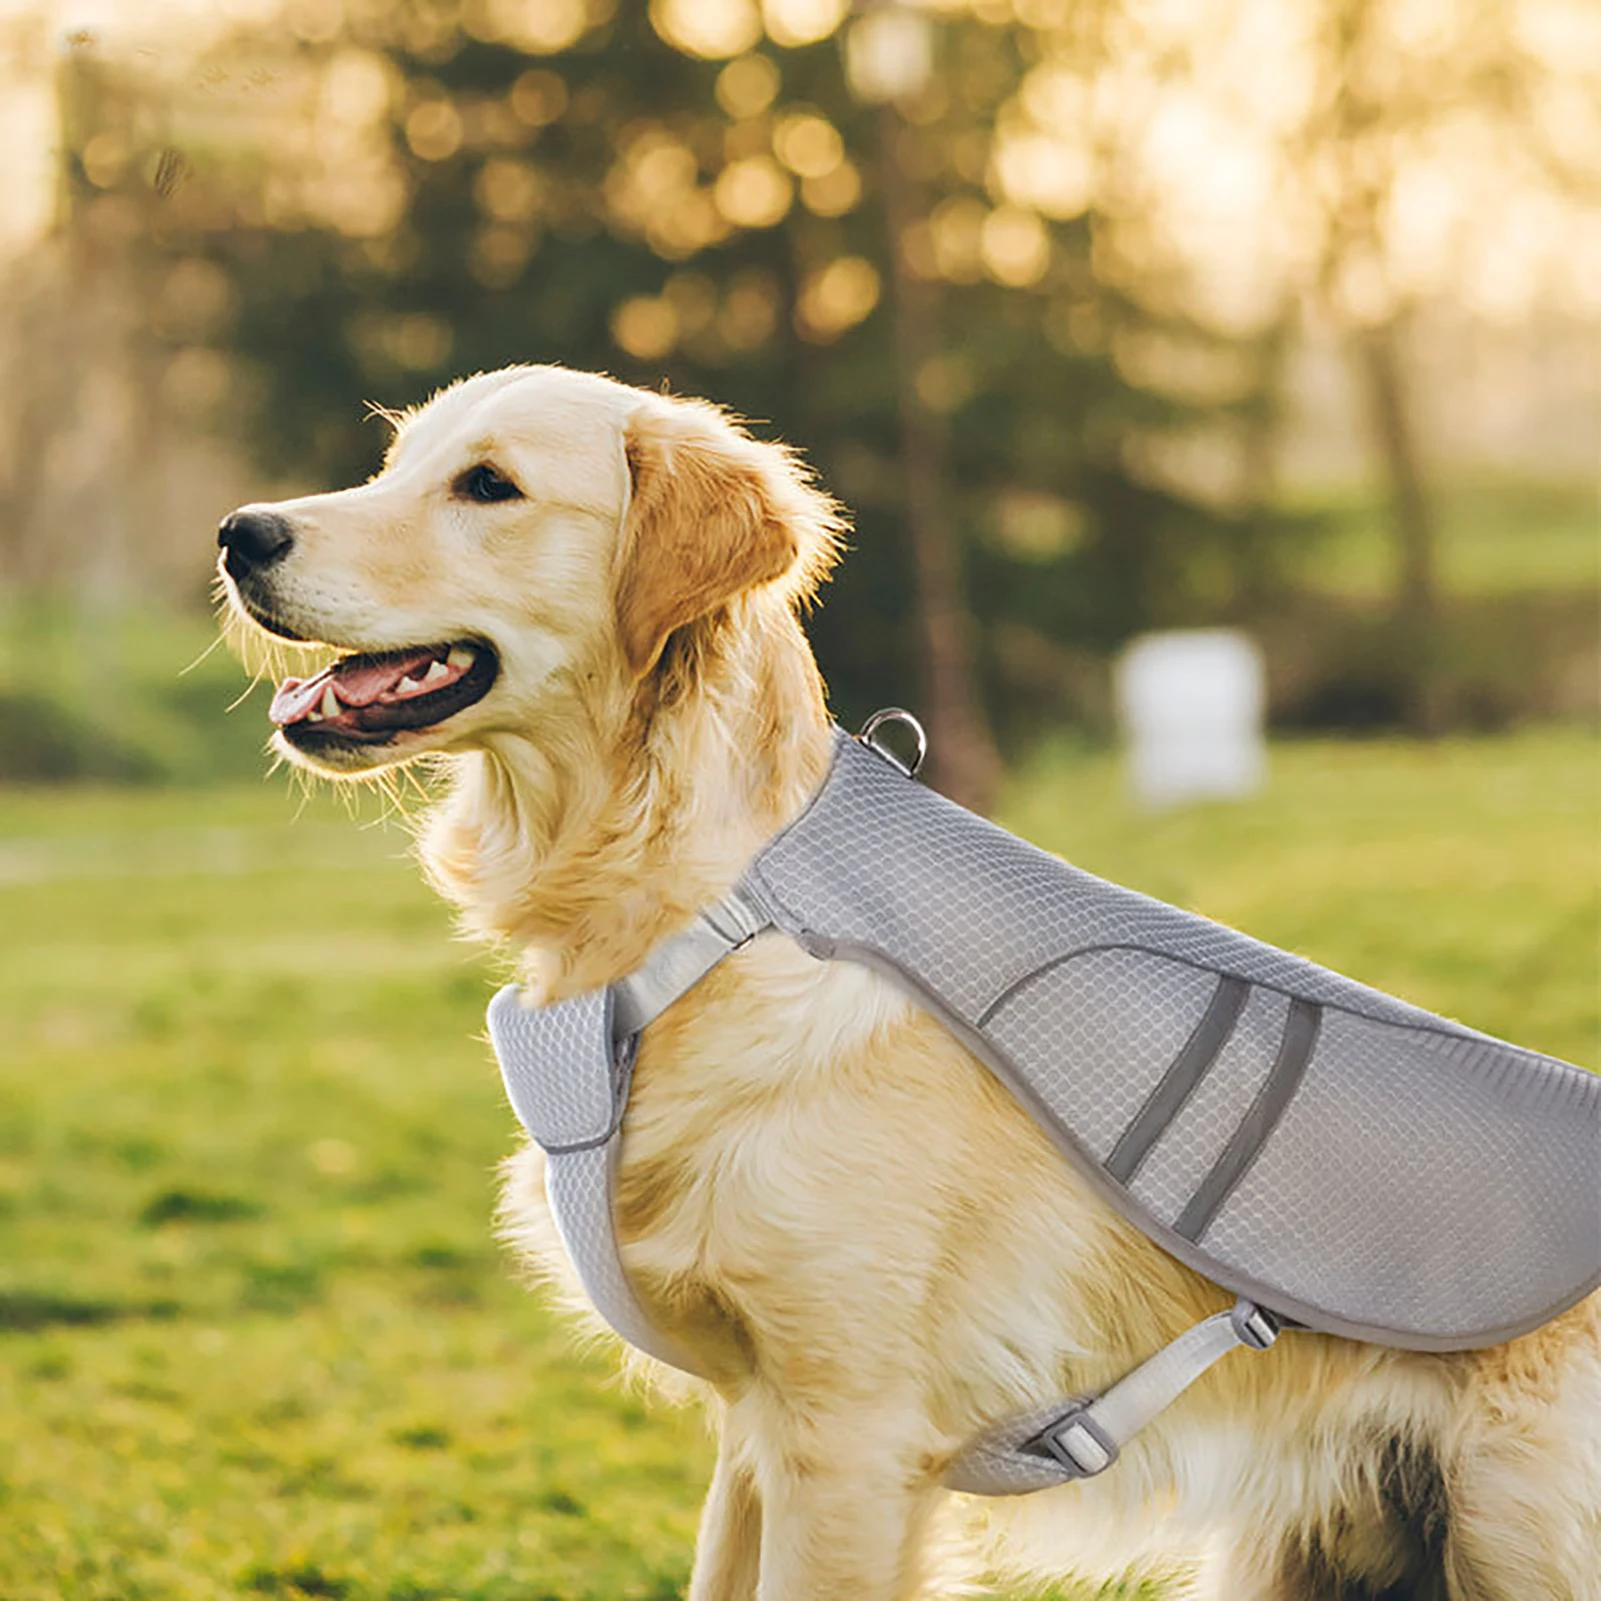 

Dog Cooling Vest Lightweight Jacket with Evaporative Microfiber Technology Reflective Breathable No Pull Harness for Puppy Walk